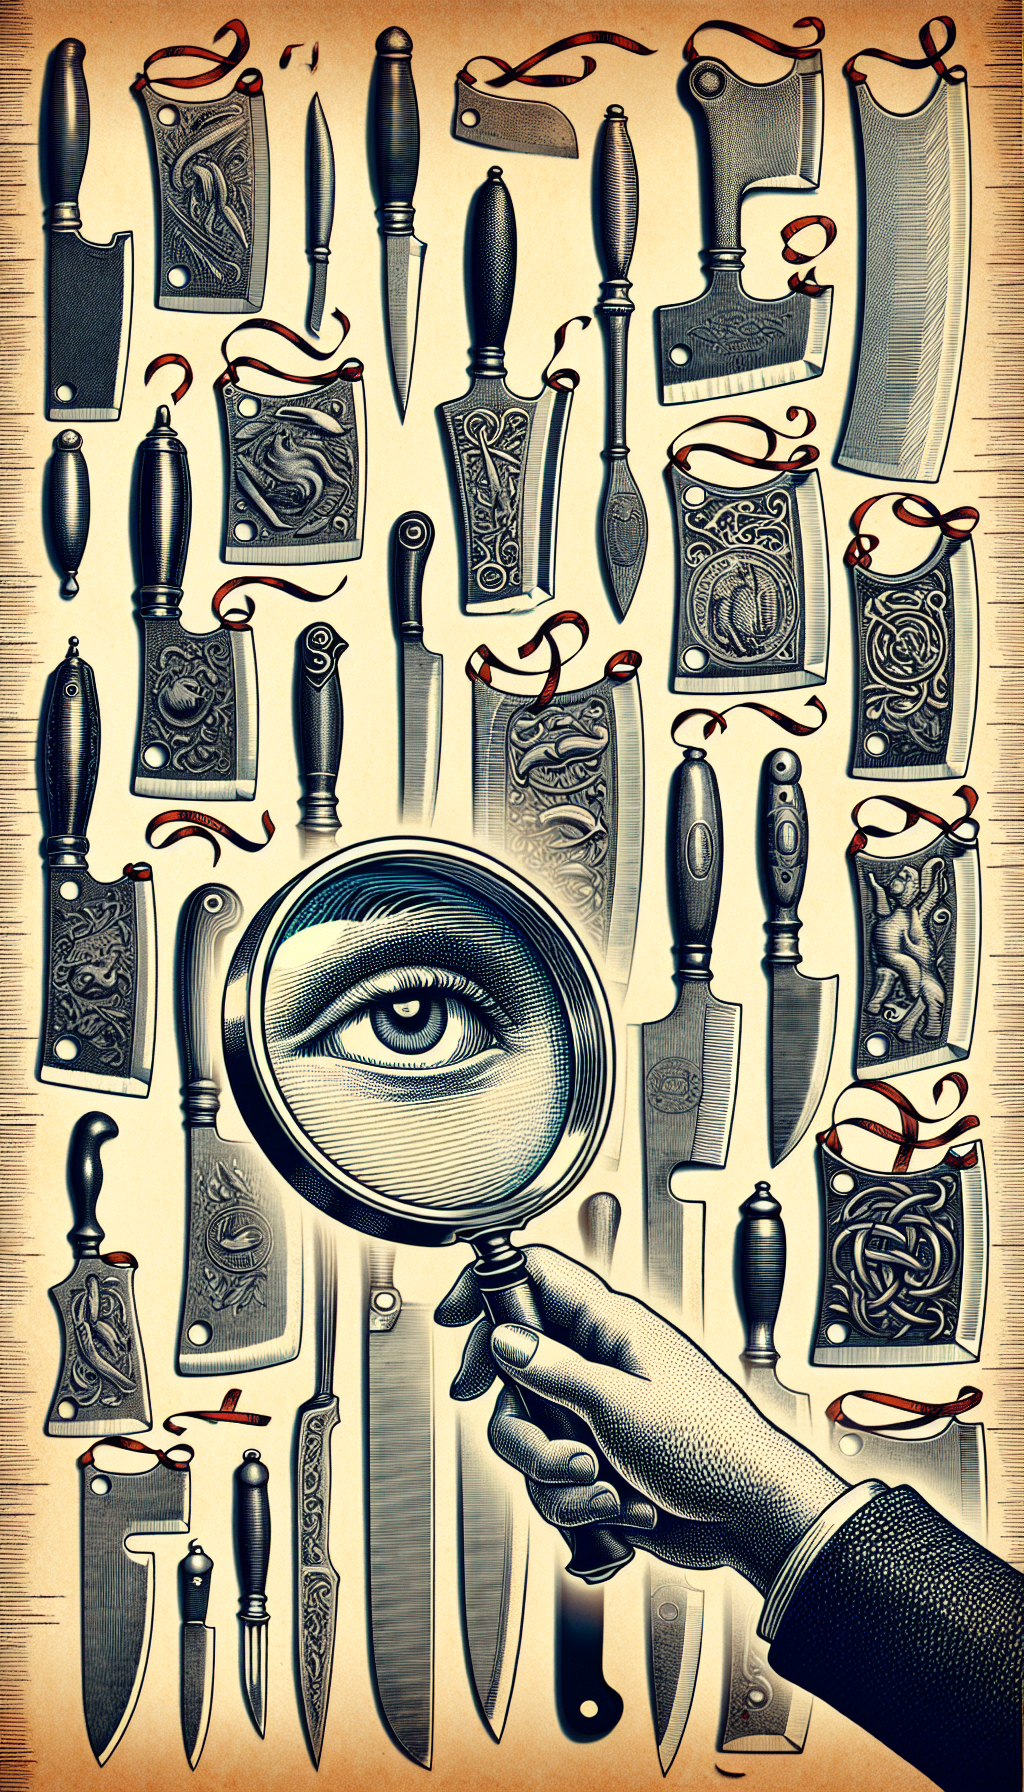 A vintage-inspired illustration featuring a wall display of various antique meat cleavers, each with its unique handle and blade design, labeled with curvy ribbons indicating their era and style. In the foreground, a magnifying glass hovers over one cleaver, details under scrutiny, symbolizing the identification process. The peering eye through the glass suggests the careful study of distinctive signatures.